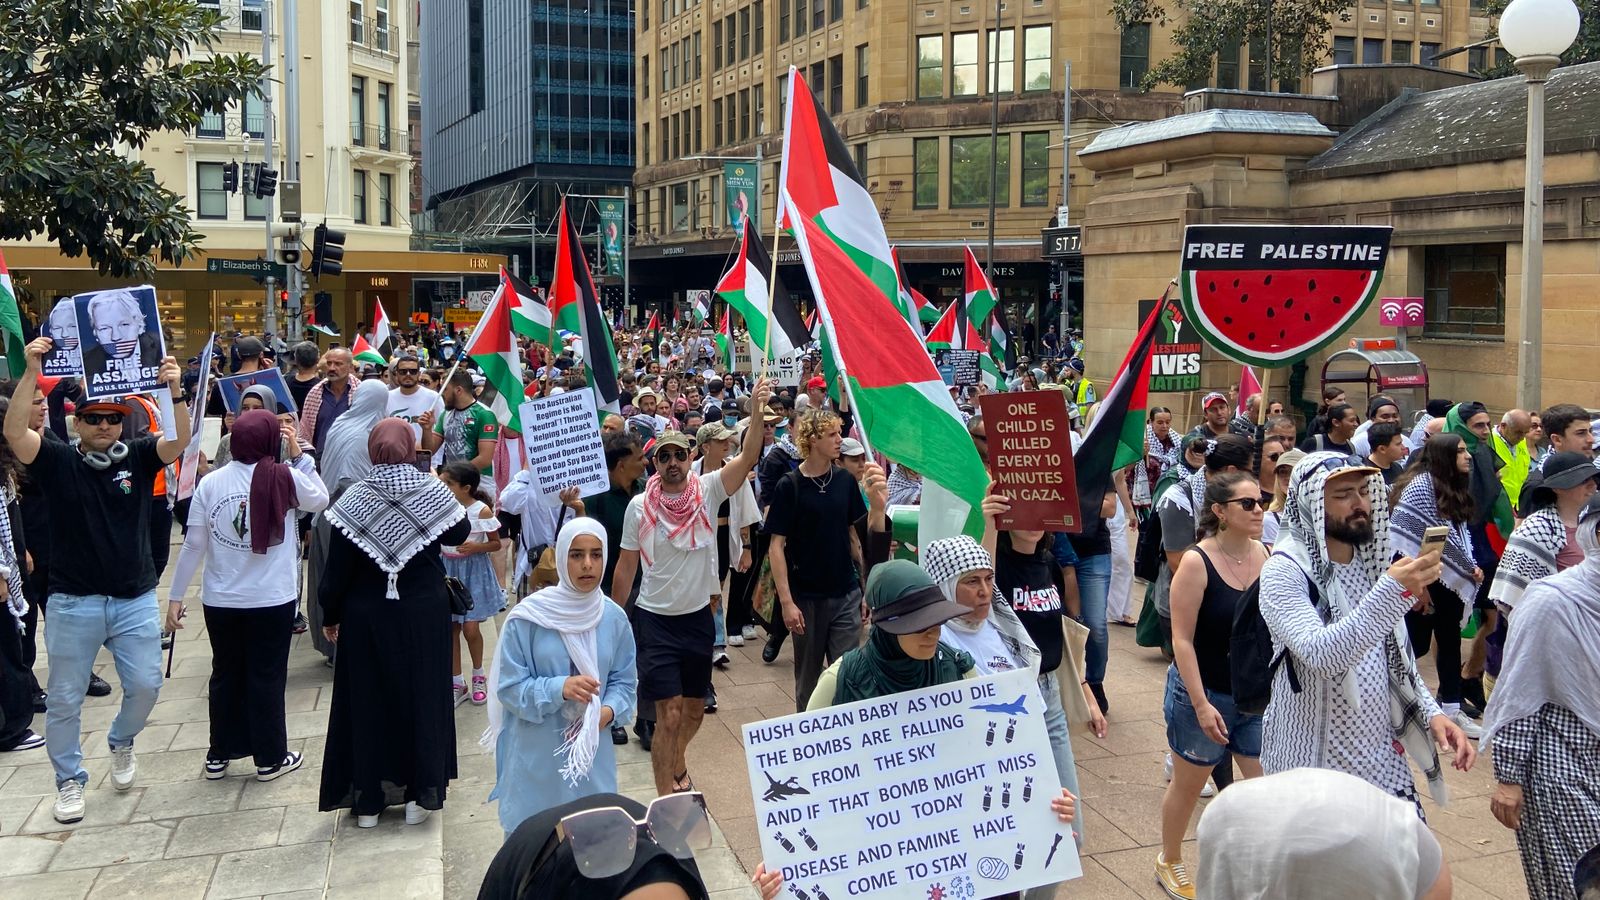 Health workers prominent at Australian protests against Gaza genocide: “I'd  never vote Labor again” - World Socialist Web Site